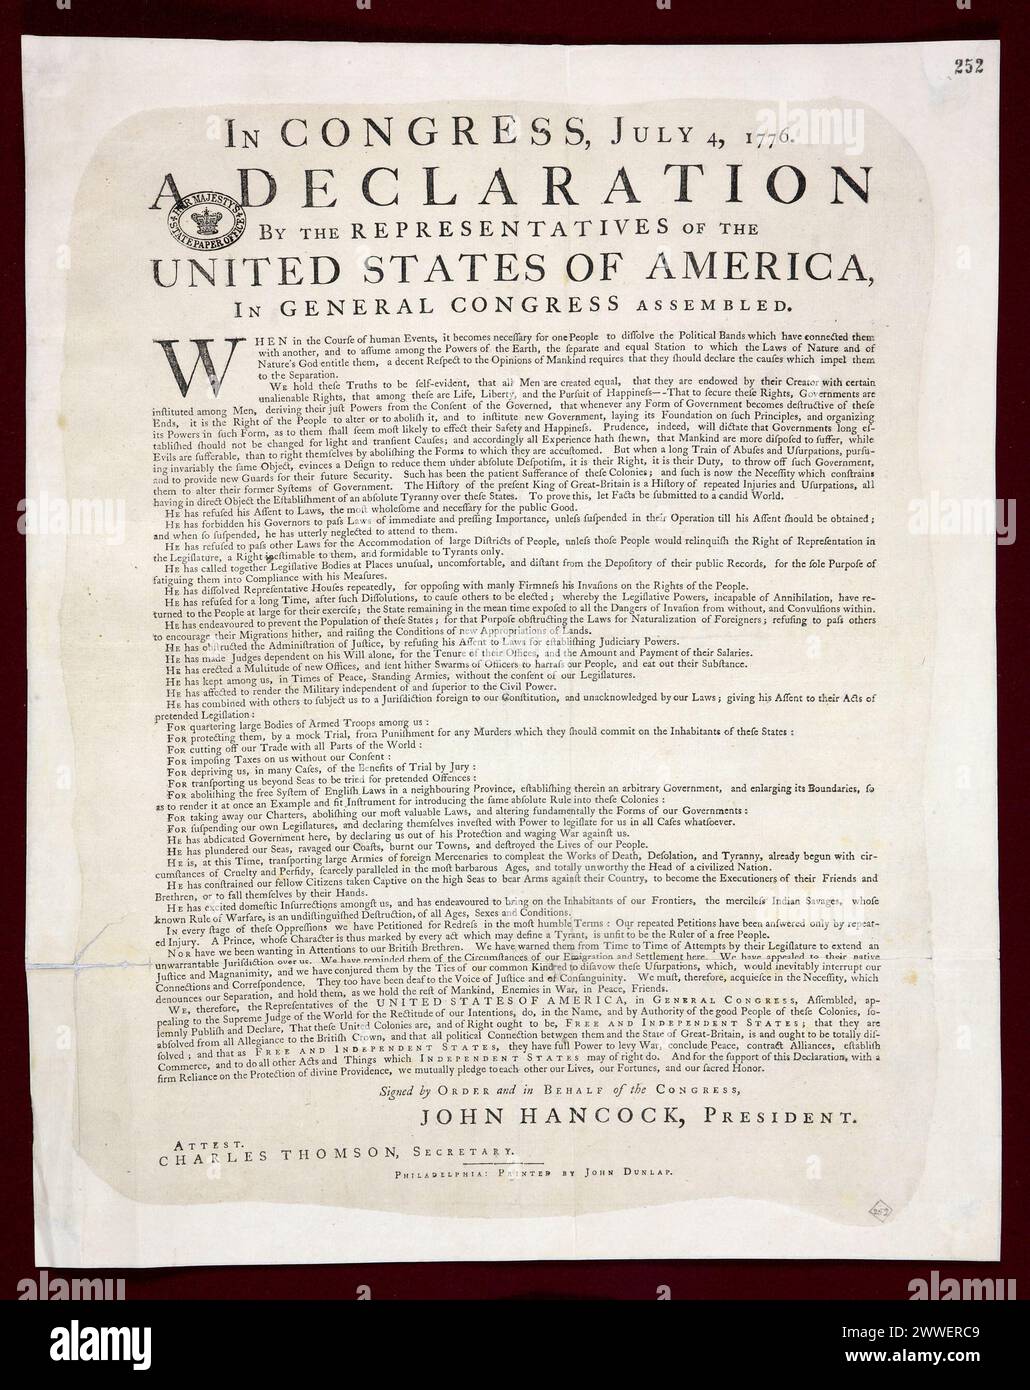 The Declaration of Independence Description: Dunlap print of the Declaration of Independence This copy of the Declaration of Independence was found by an American antiquarian bookseller carrying out research at The National Archives in 2008. The poster-sized document was hidden among correspondence from American colonists that had been intercepted by the British in the 18th century. The discovery of the Dunlap print of the Declaration of Independence, printed on July 4 1776, brings the total of known surviving copies worldwide to 26. The Dunlap prints were the first official printings of the D Stock Photo